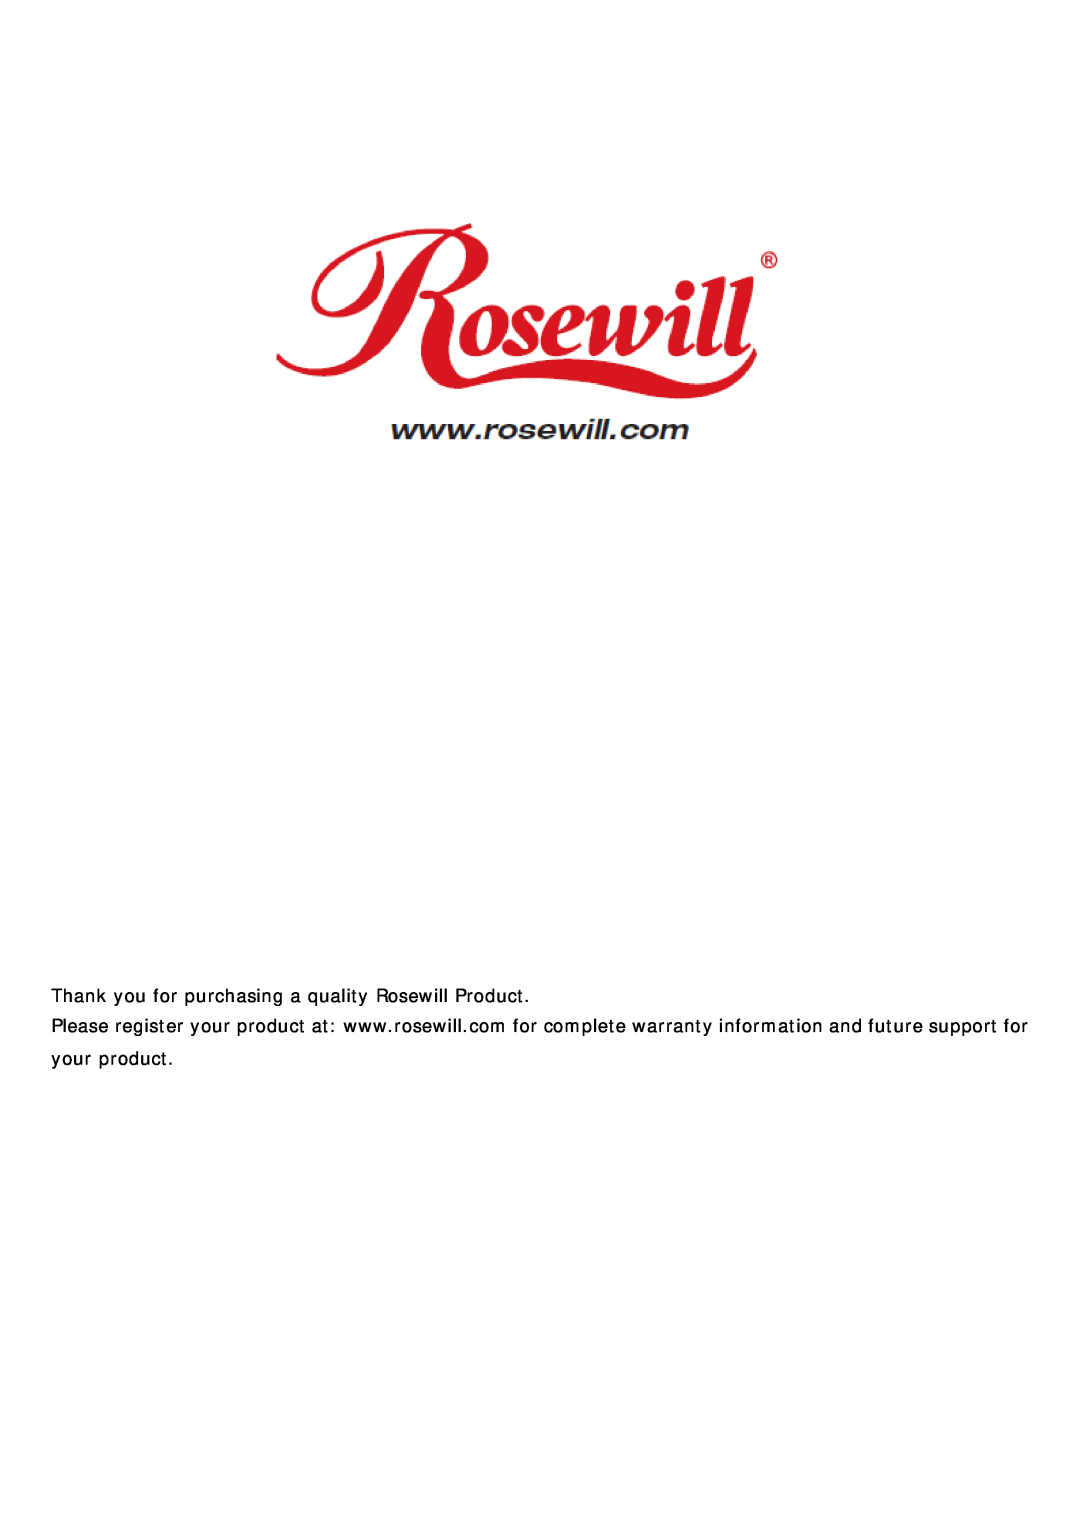 Rosewill user manual Thank you for purchasing a quality Rosewill Product, SERVER RSV-R4000, User Manual 